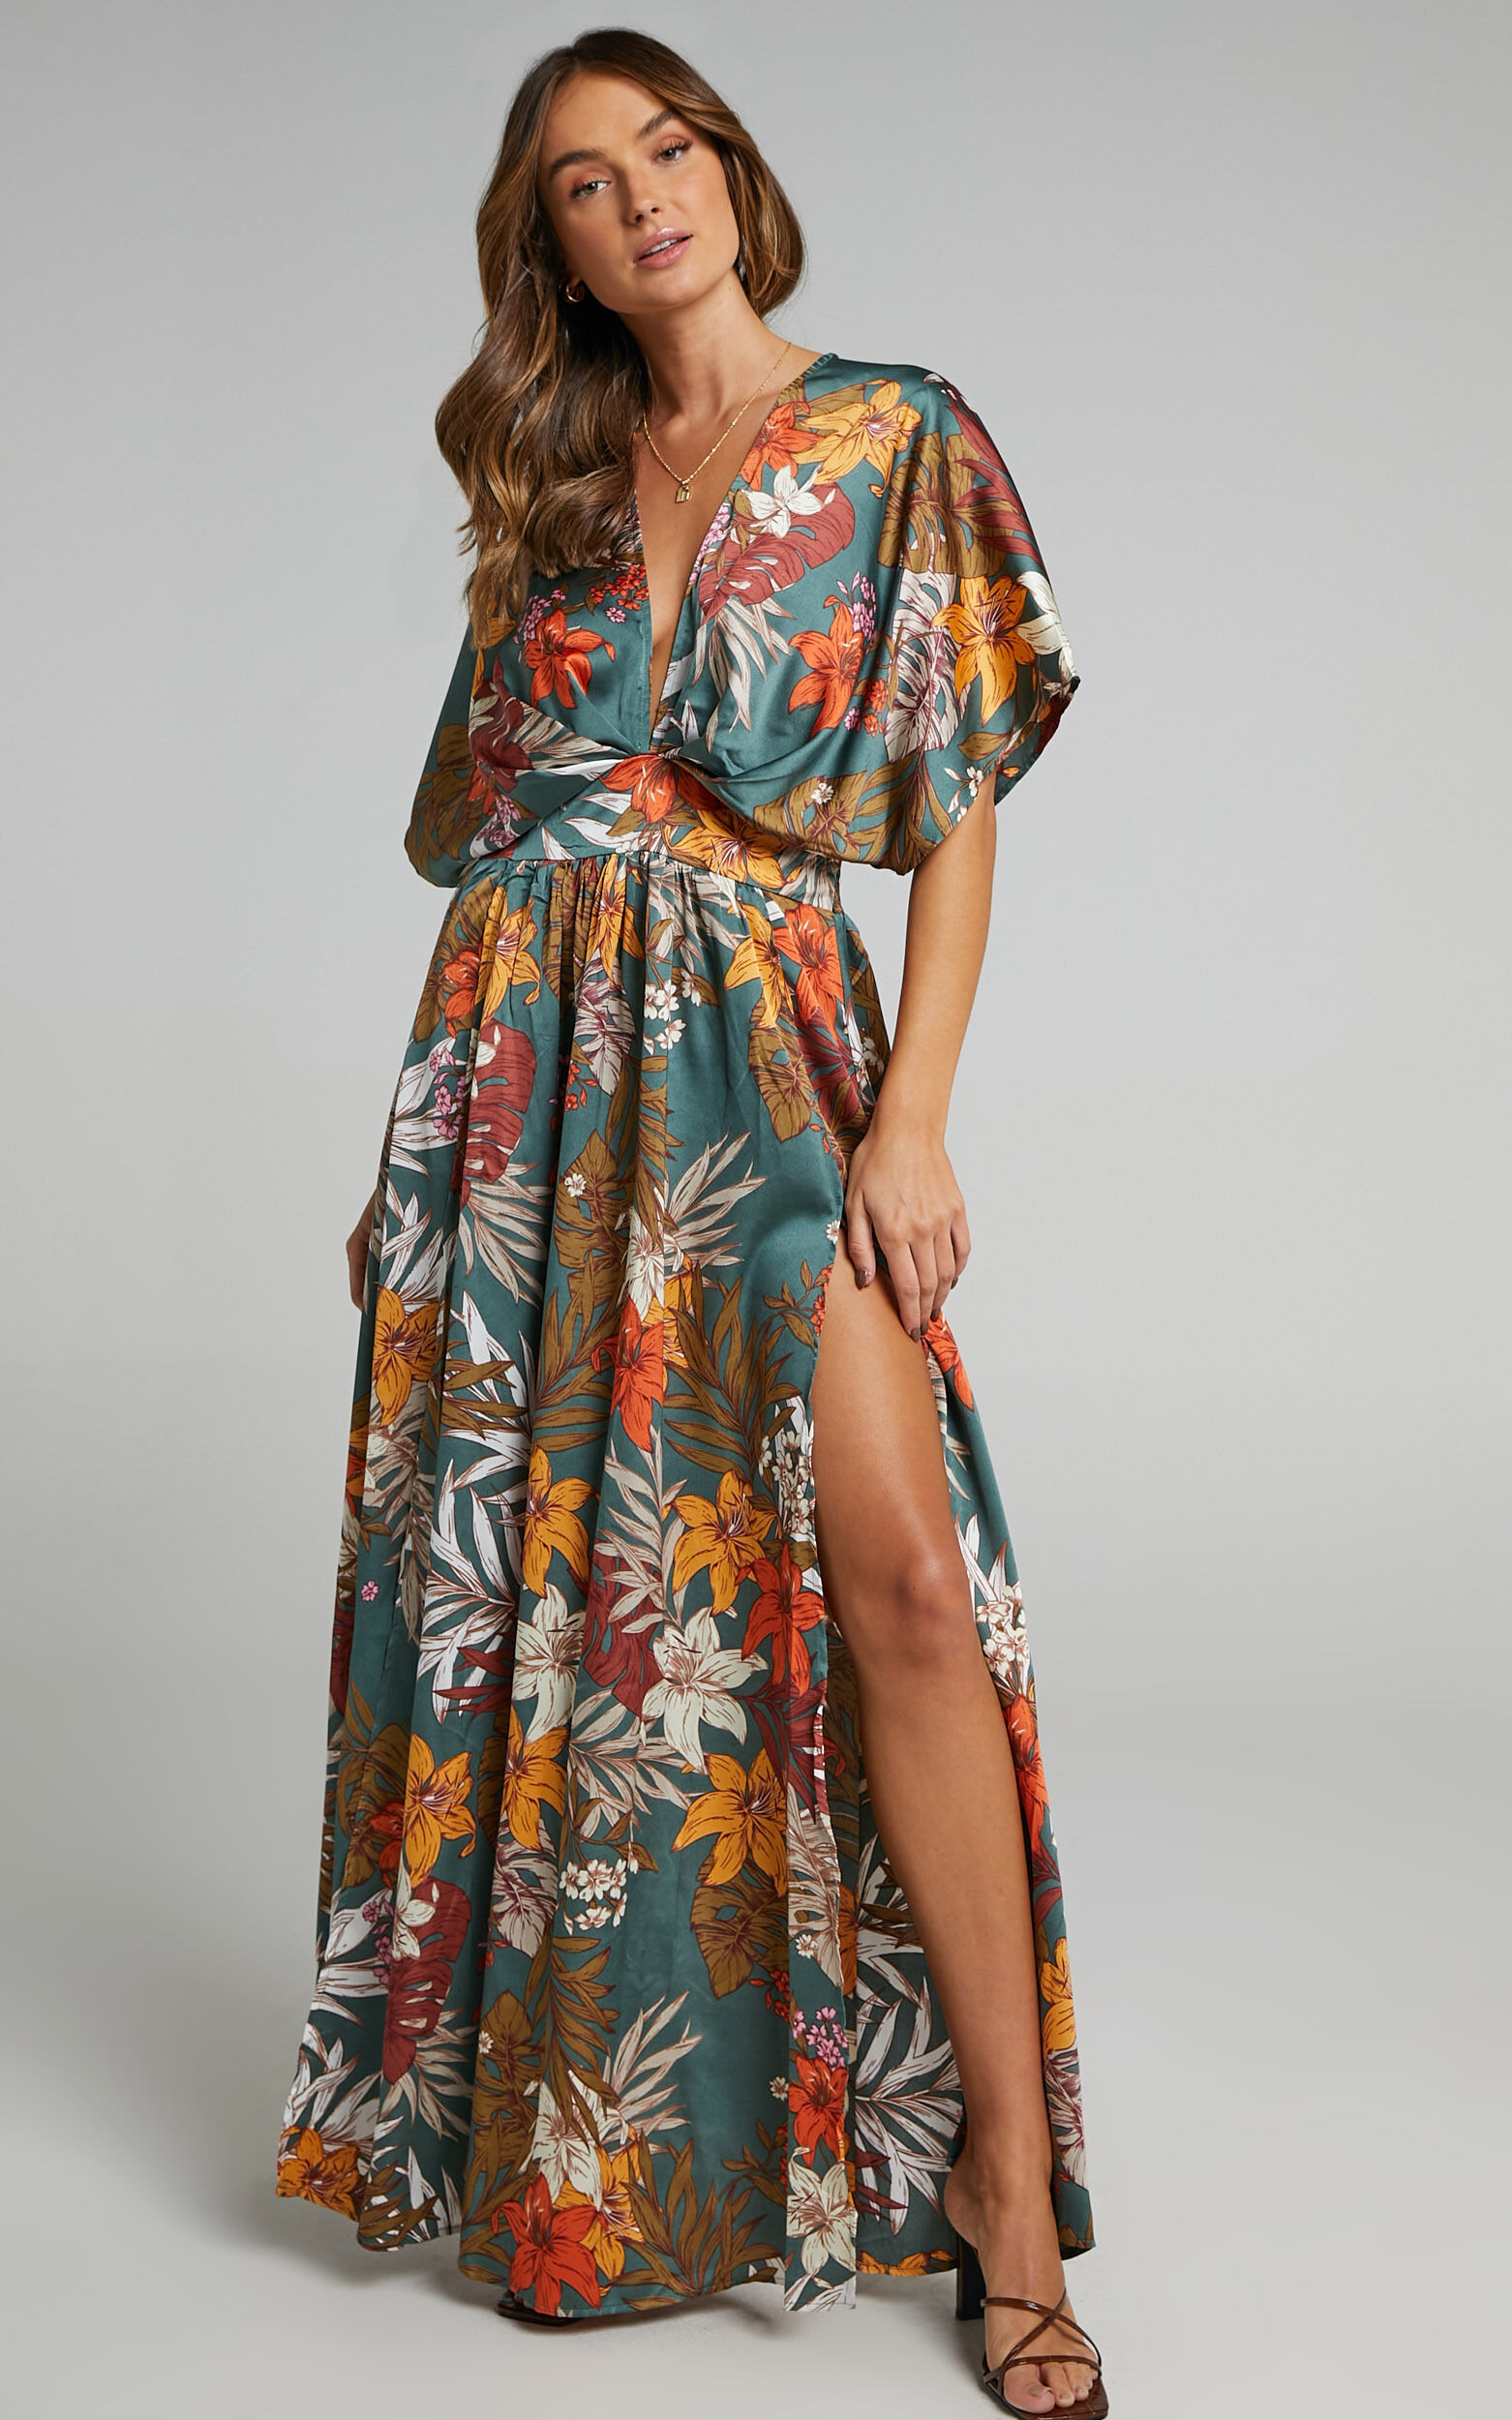 Vacay Ready Maxi Dress in Teal Floral ...